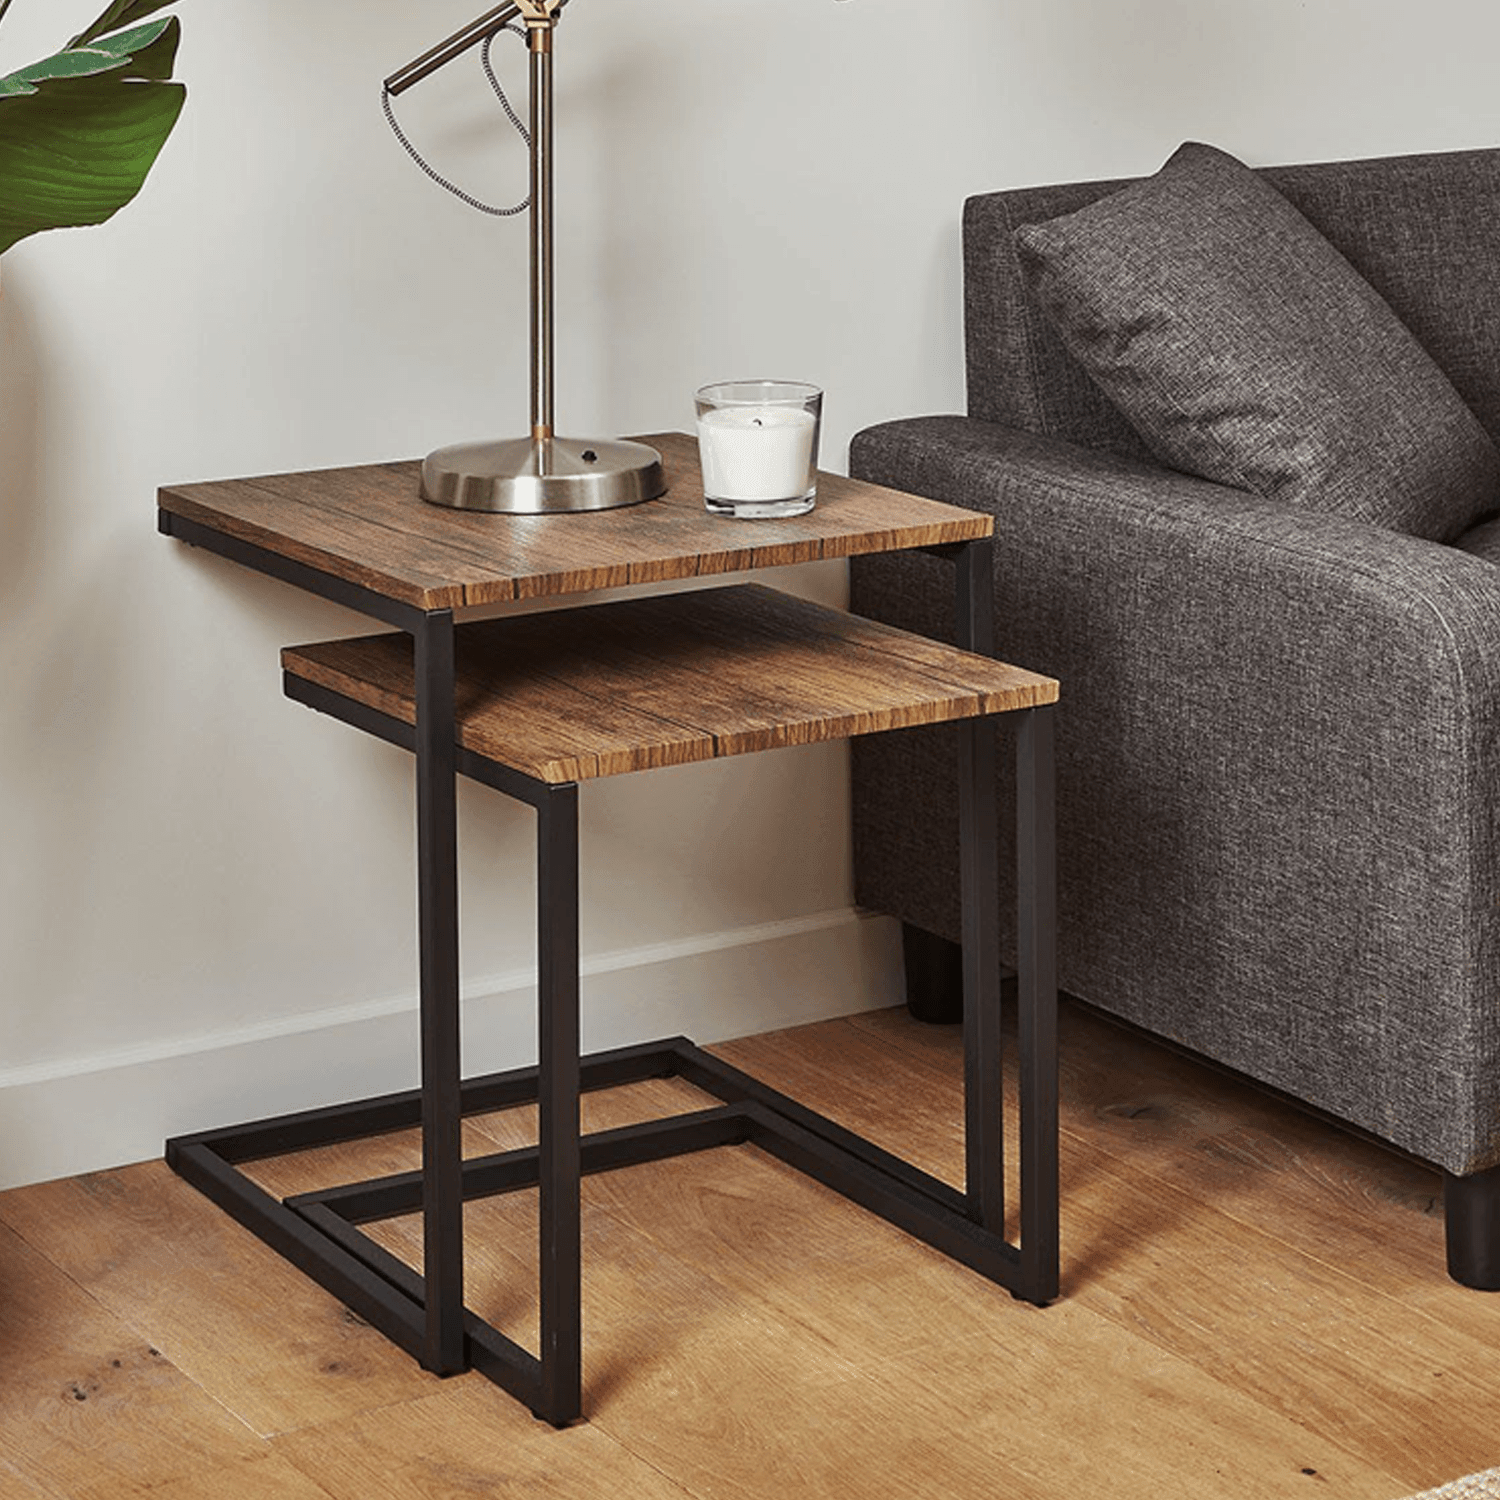 Sheffield industrial nest of tables - wood effect & metal - Laura James